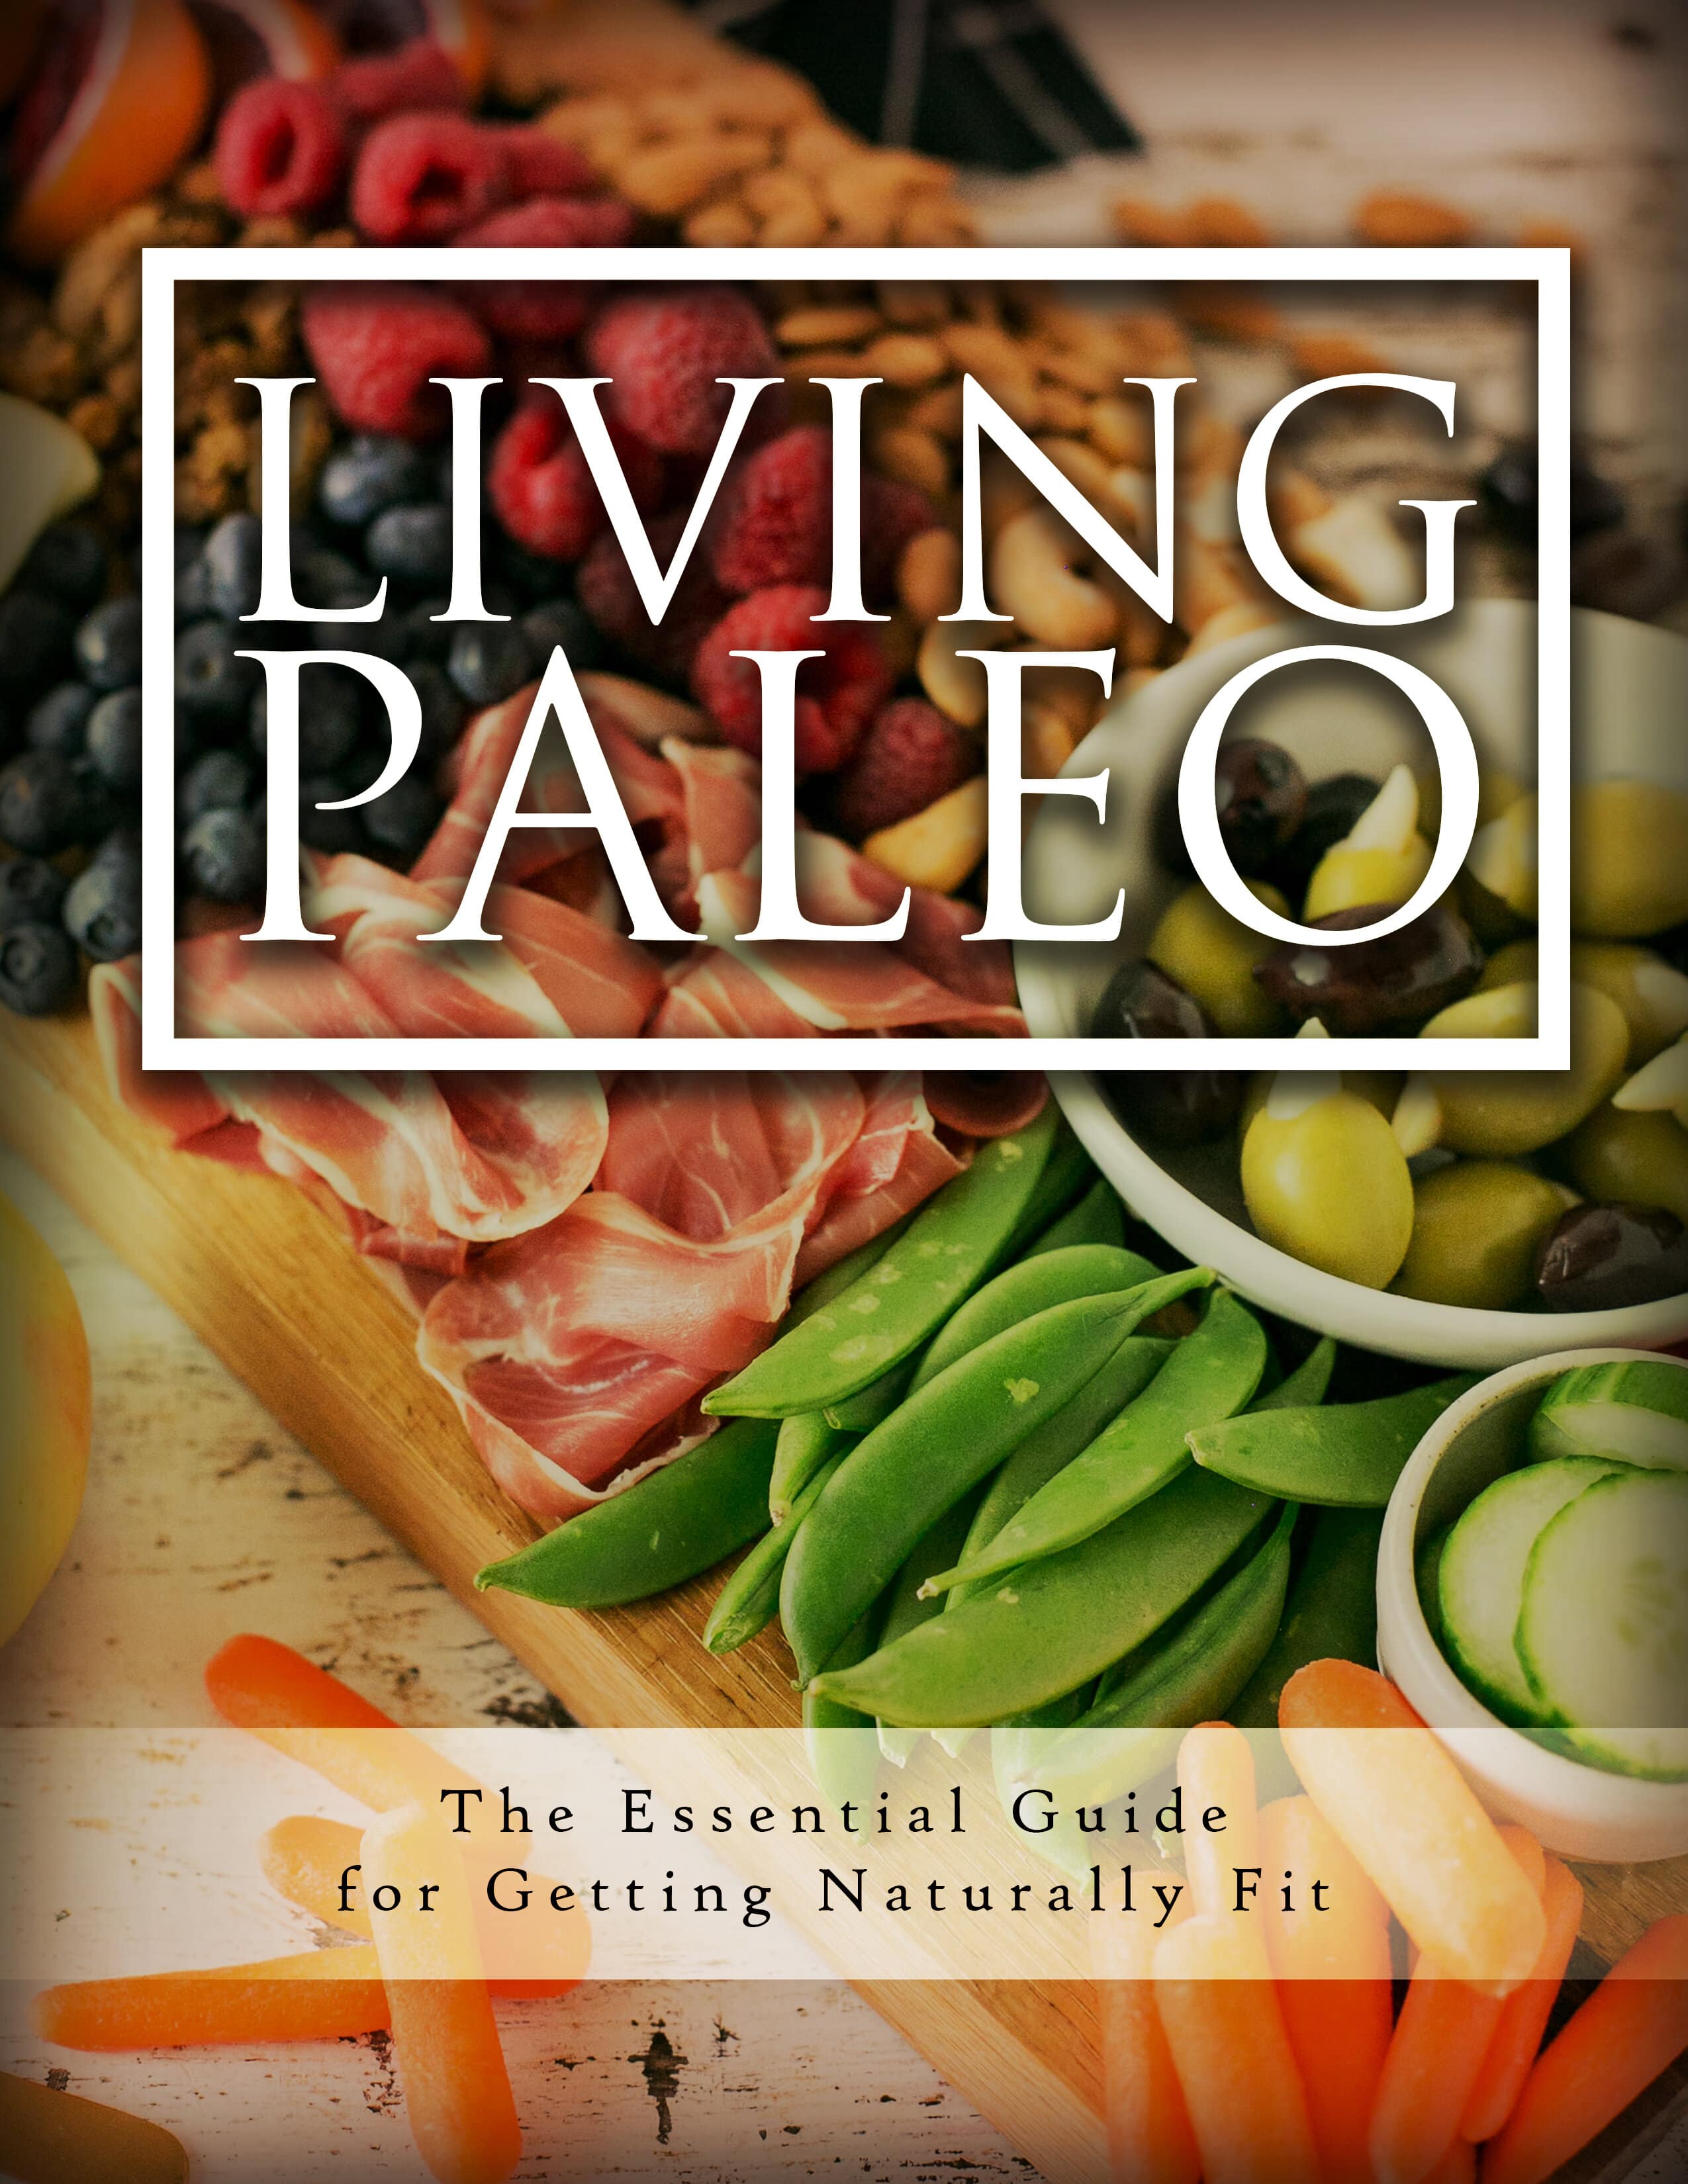 Living Paleo (The Essential Guide For Getting Naturally Fit) Ebook's Book Image